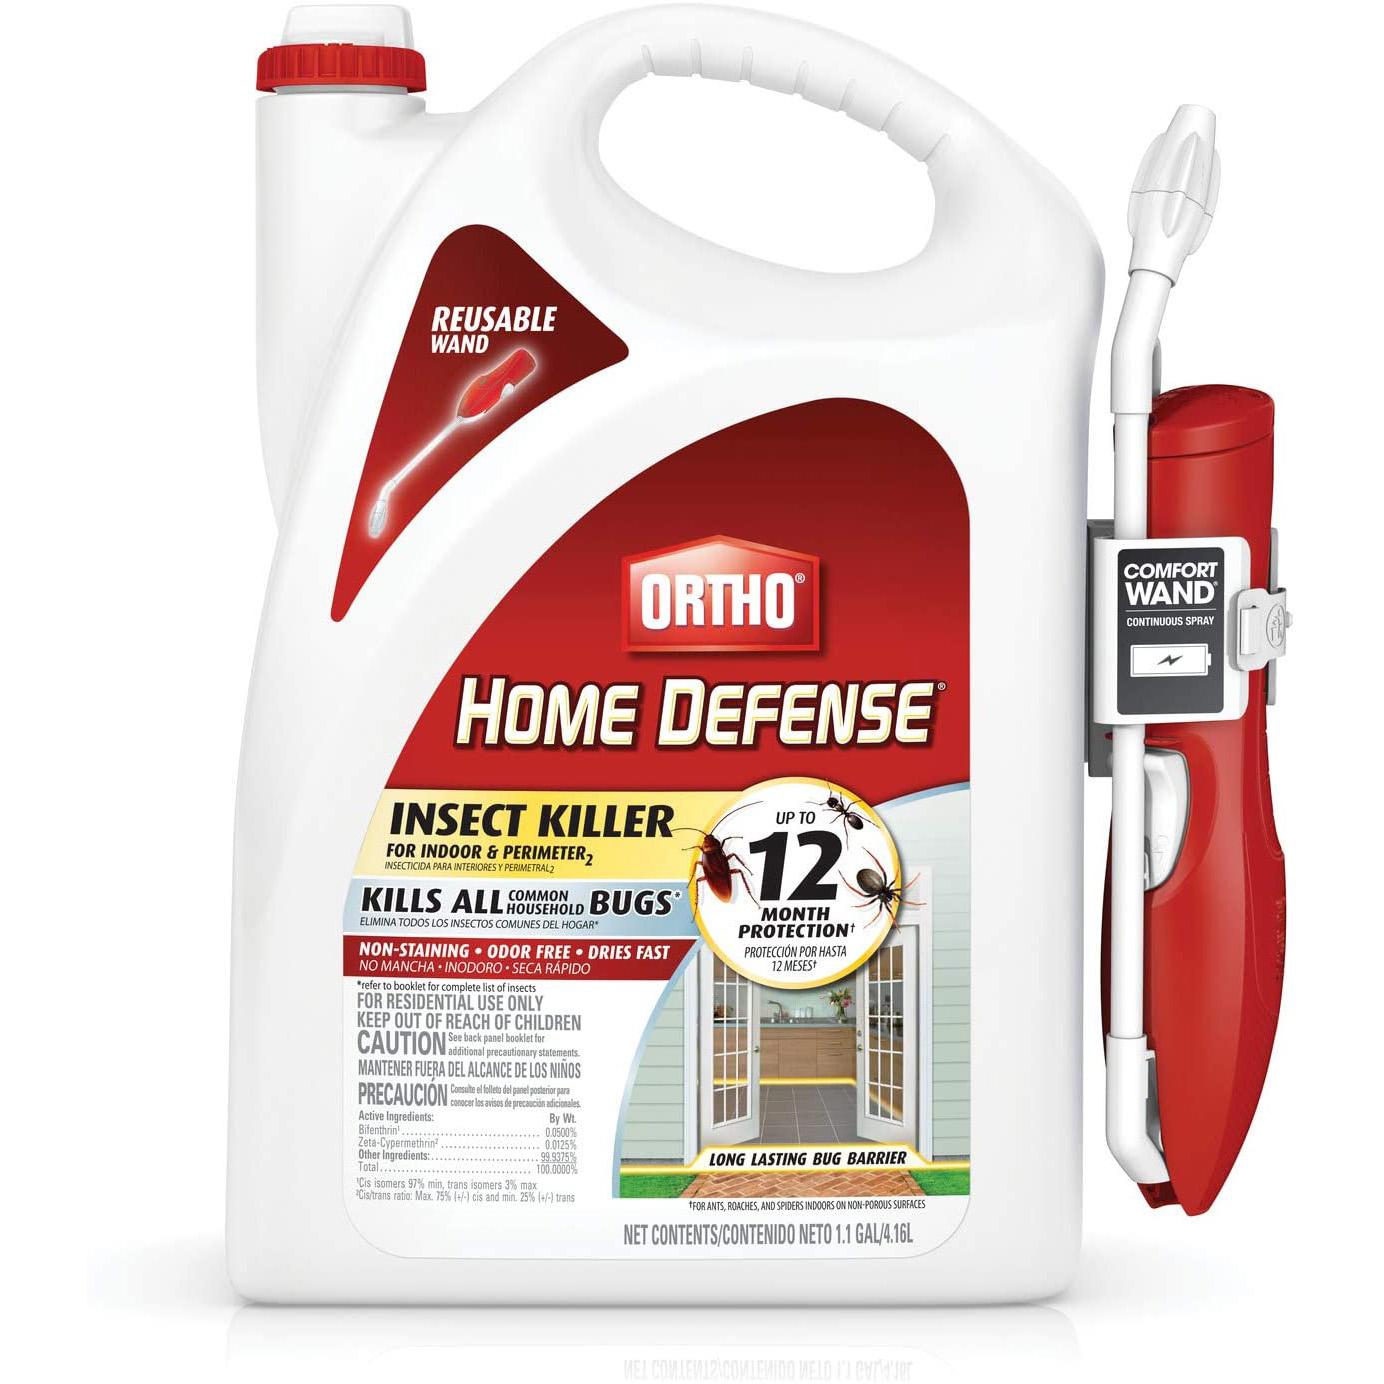 Home Defense Insect Killer for Indoor for $11.59